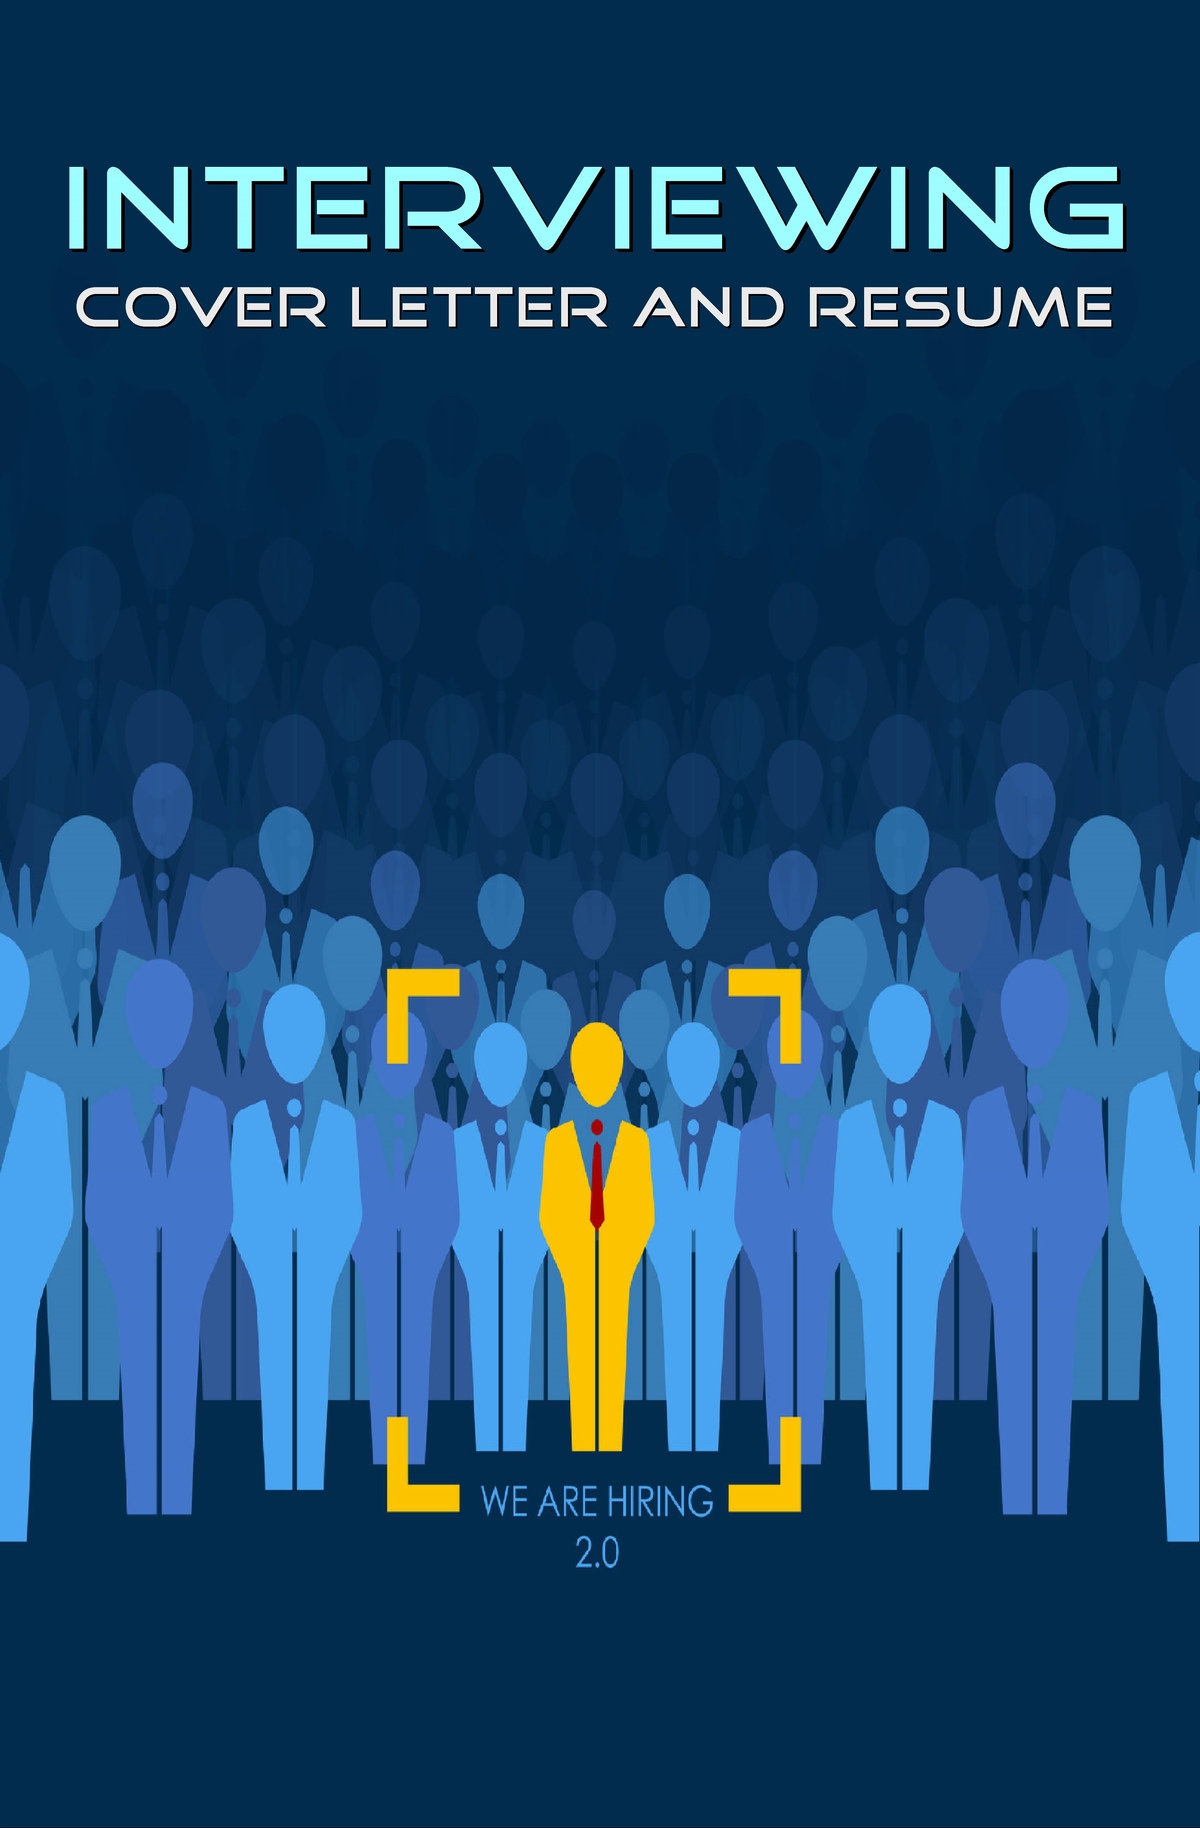 L7013 - Create a Great Cover Letter and Resume